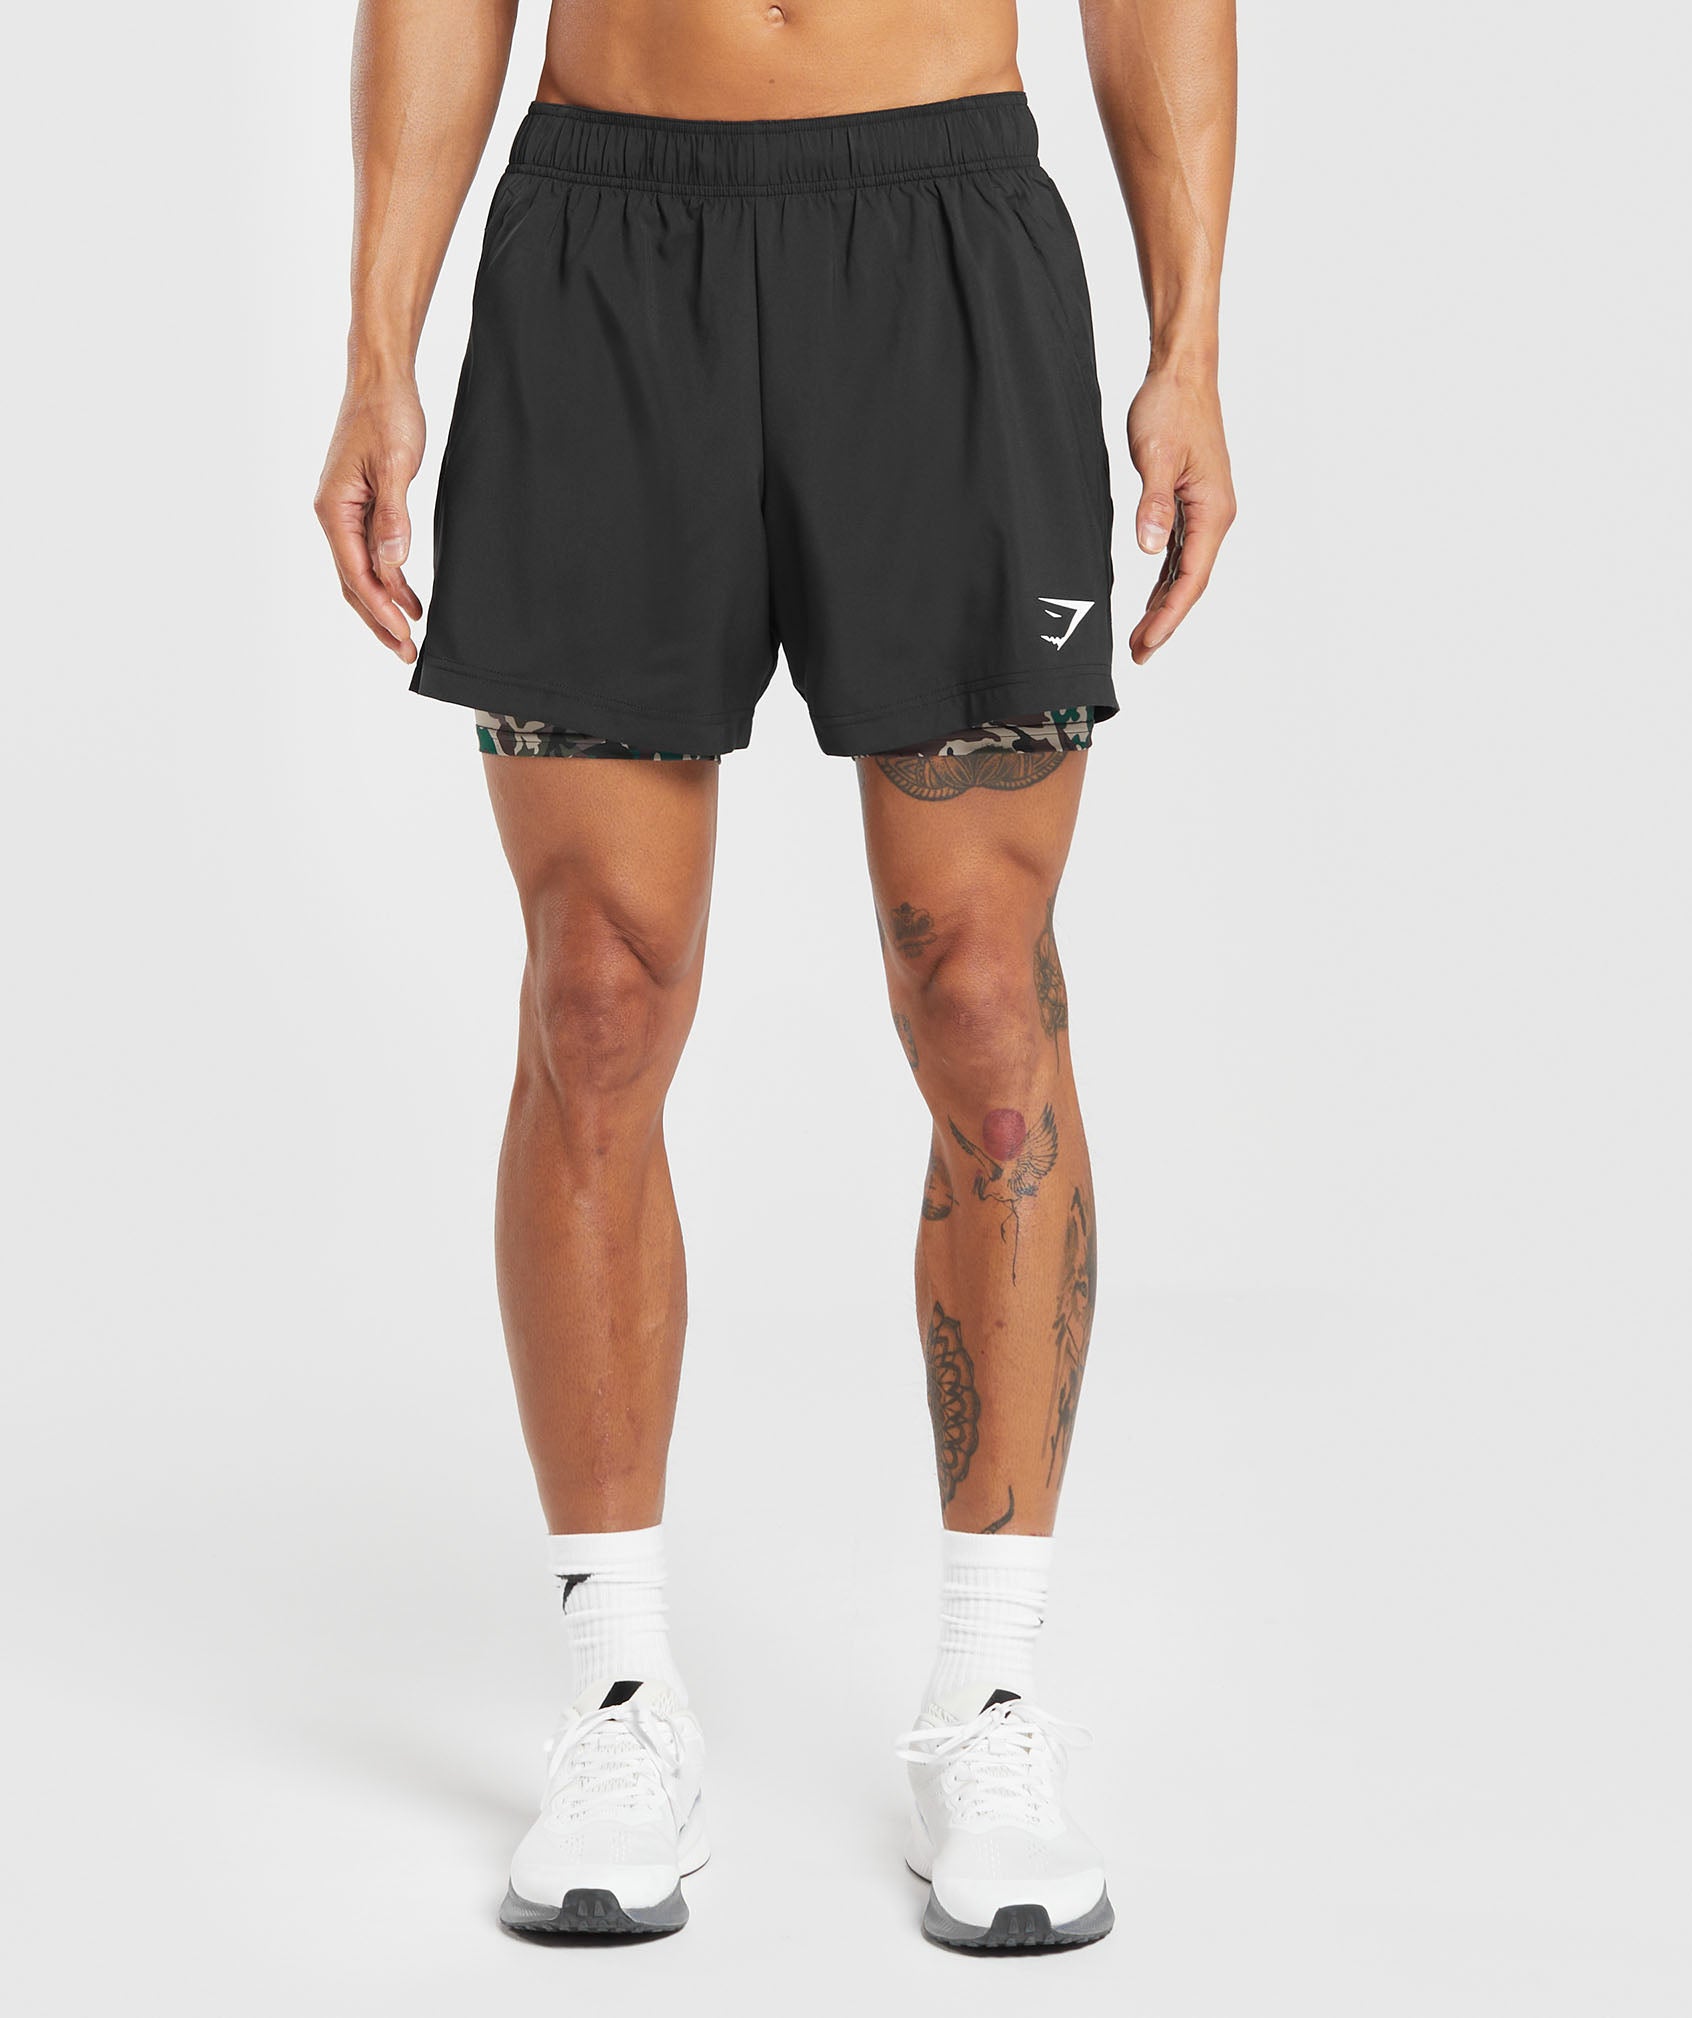 Sport 5" 2 in 1 Shorts in Black/Cement Brown - view 1